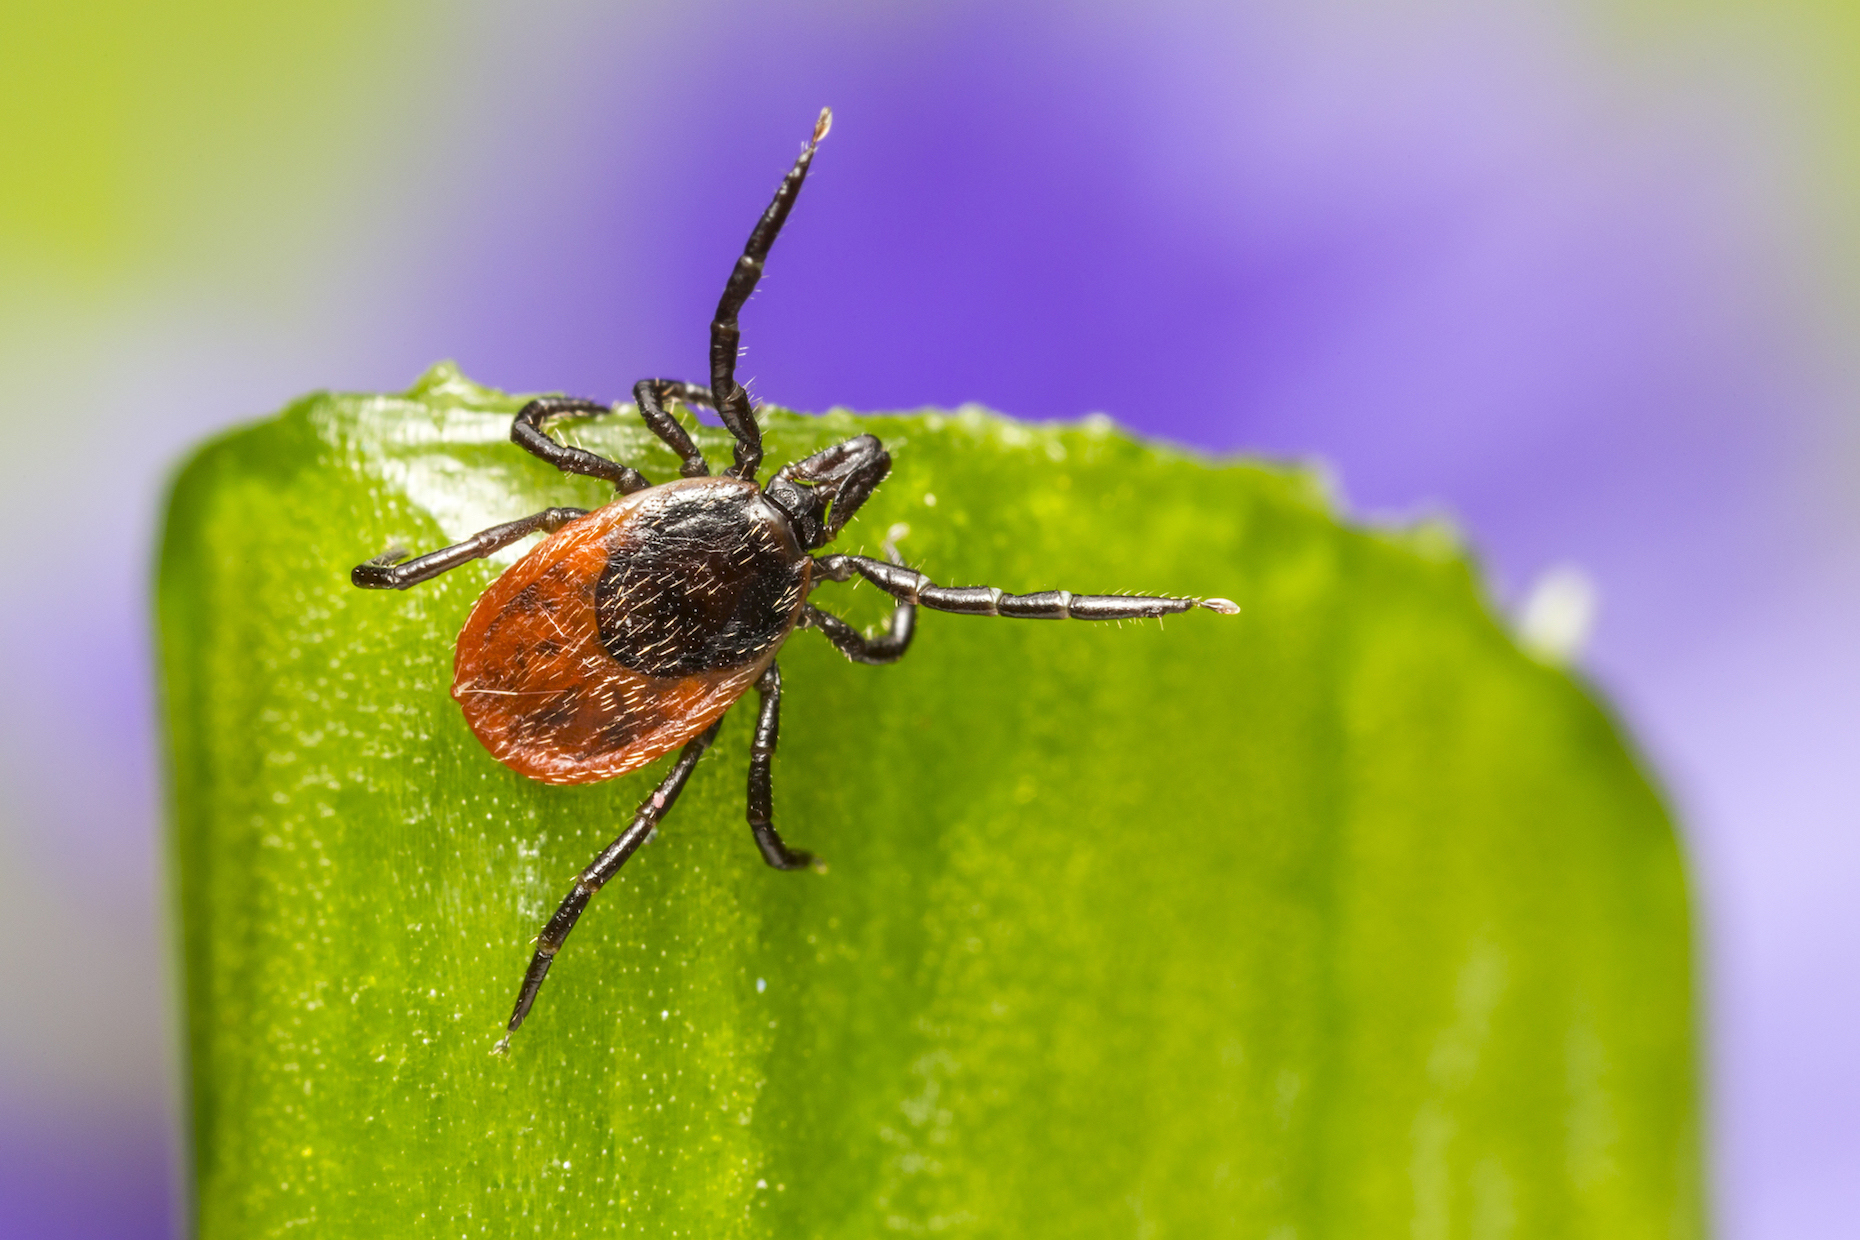 20 facts about Lyme disease